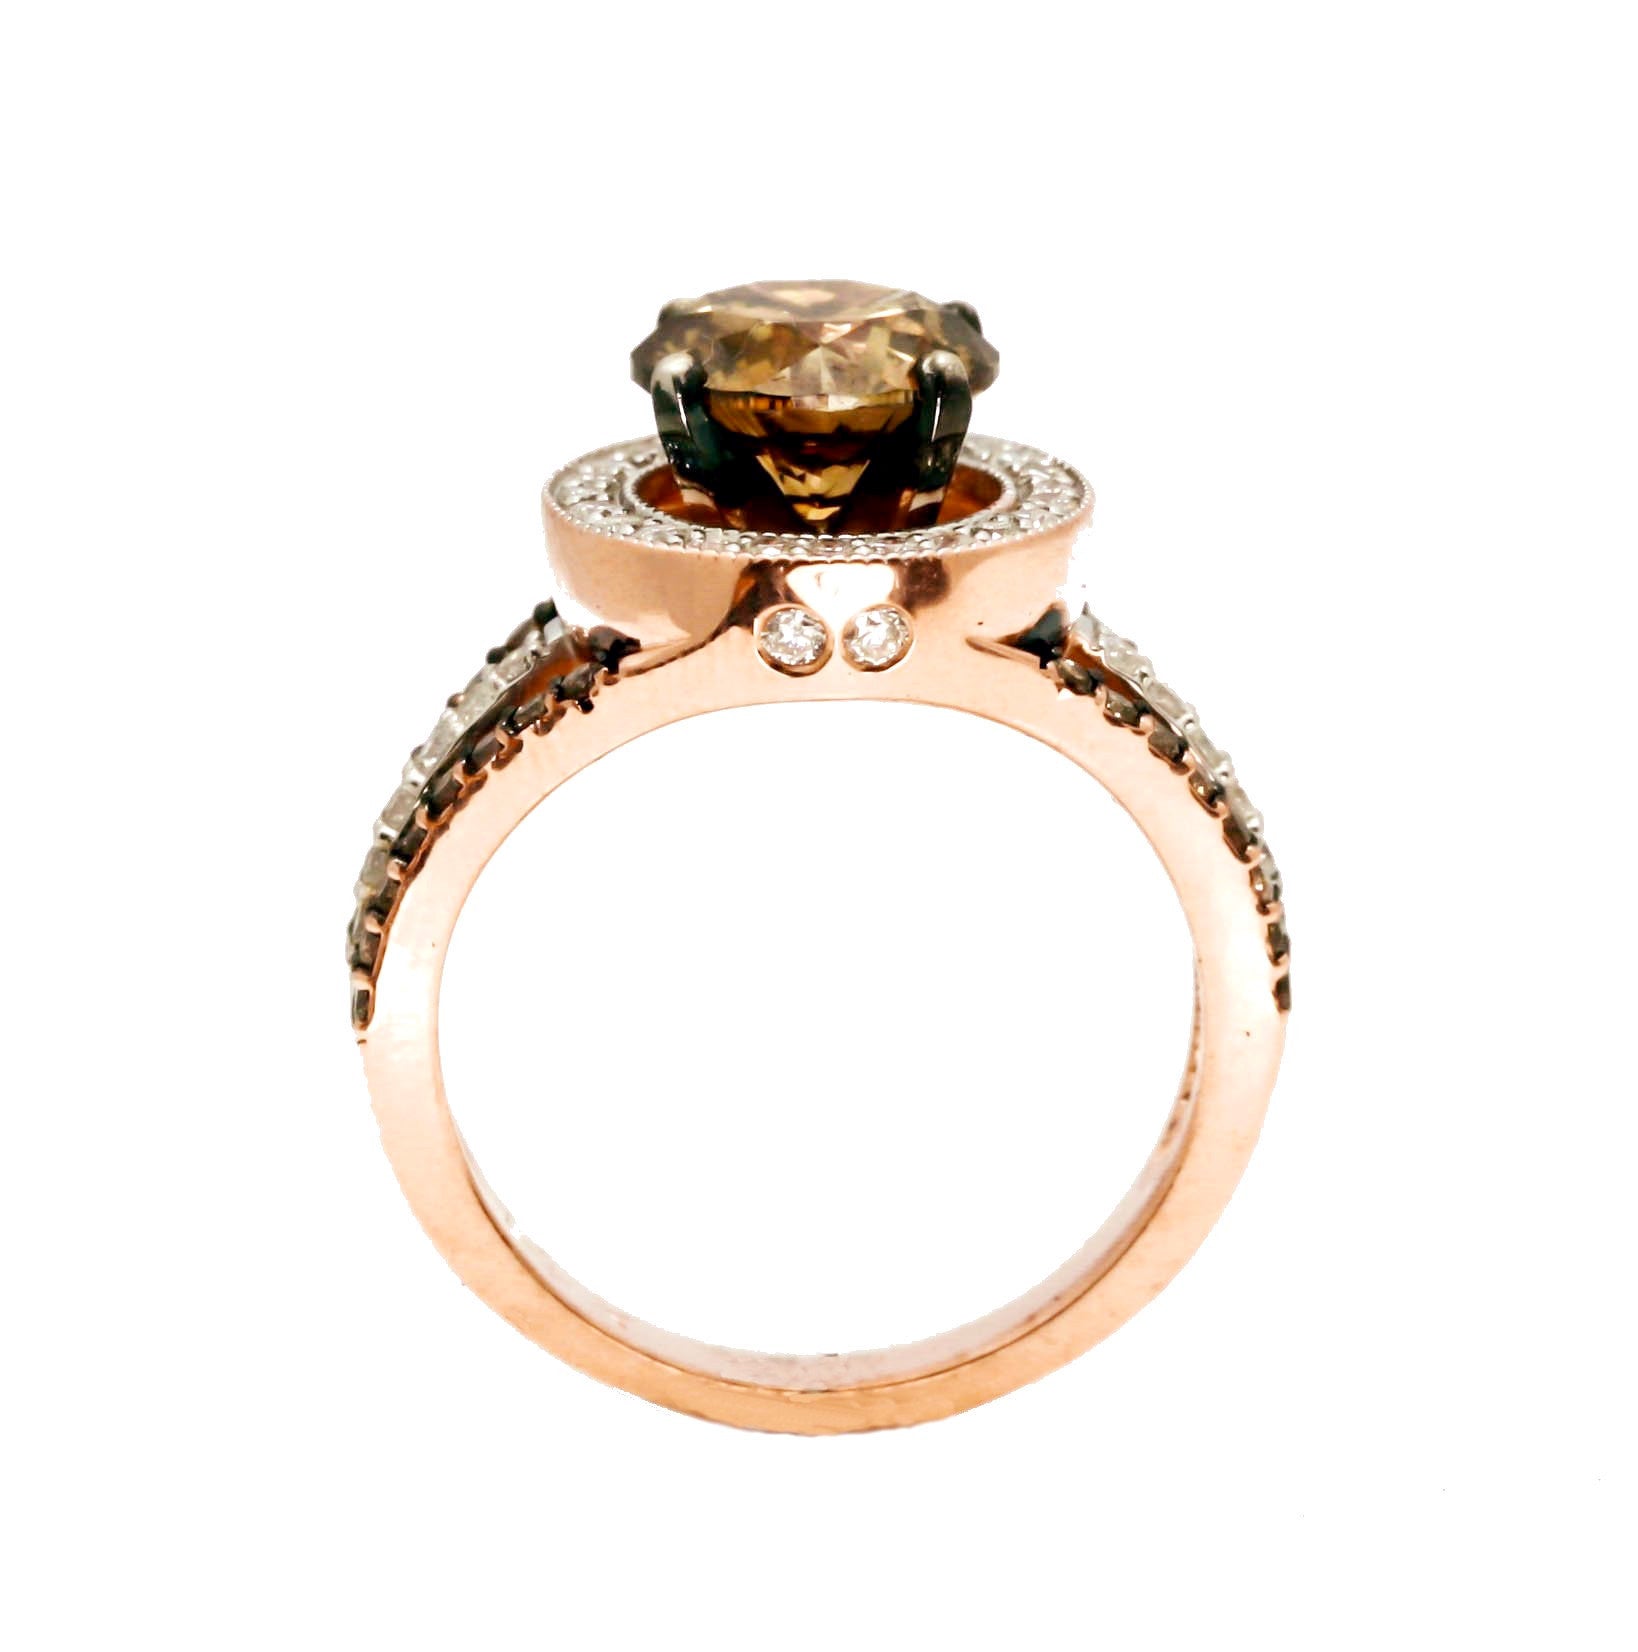 Unique 2 Carat (8 mm) Fancy Brown Smoky Quartz Engagement Ring, Floating Halo Rose Gold, White & Fancy Color Brown Diamonds, Anniversary Ring - 2SQ94627